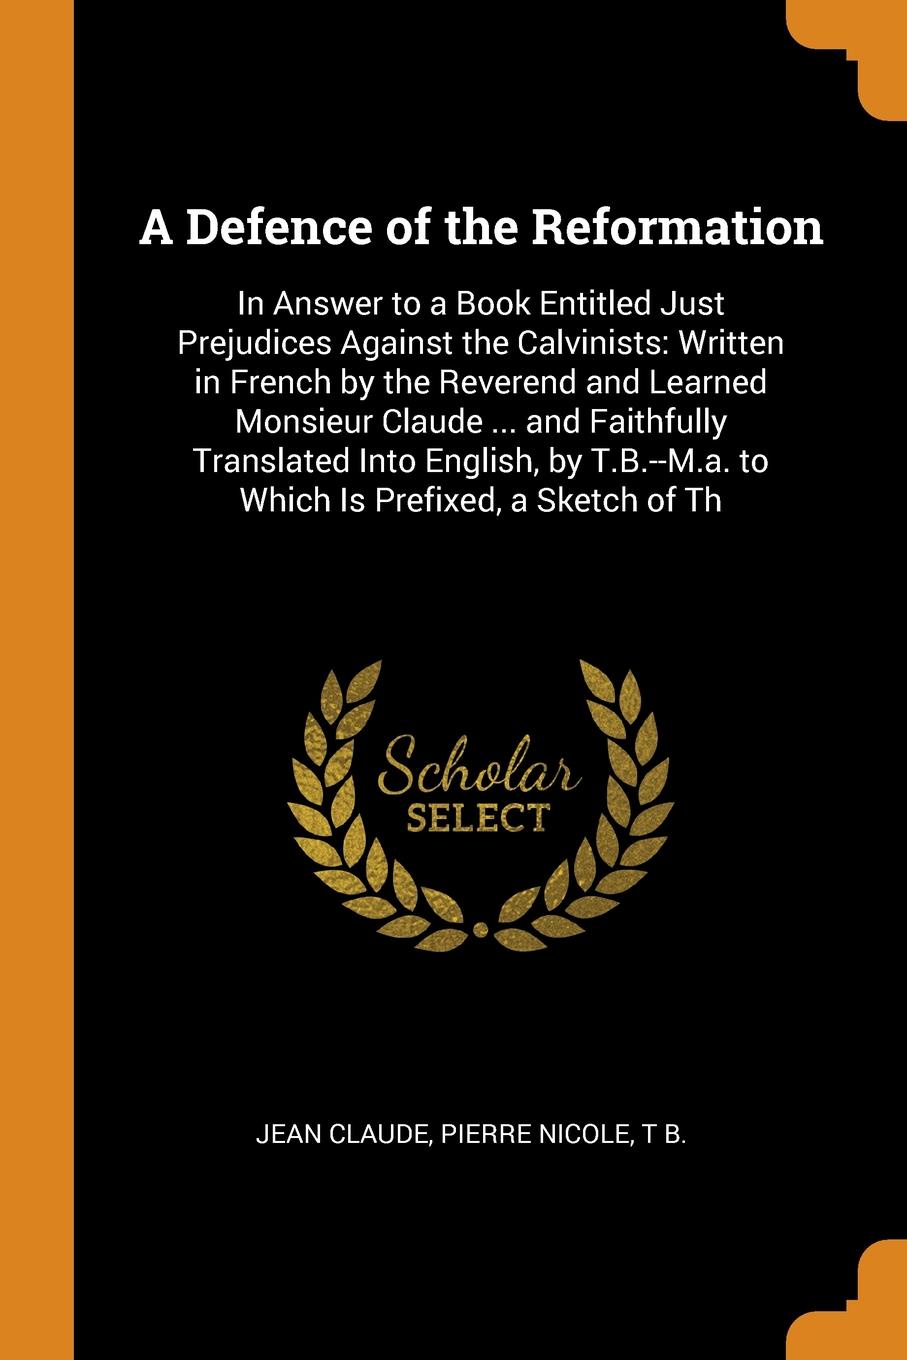 A Defence of the Reformation. In Answer to a Book Entitled Just Prejudices Against the Calvinists: Written in French by the Reverend and Learned Monsieur Claude ... and Faithfully Translated Into English, by T.B.--M.a. to Which Is Prefixed, a Sket...